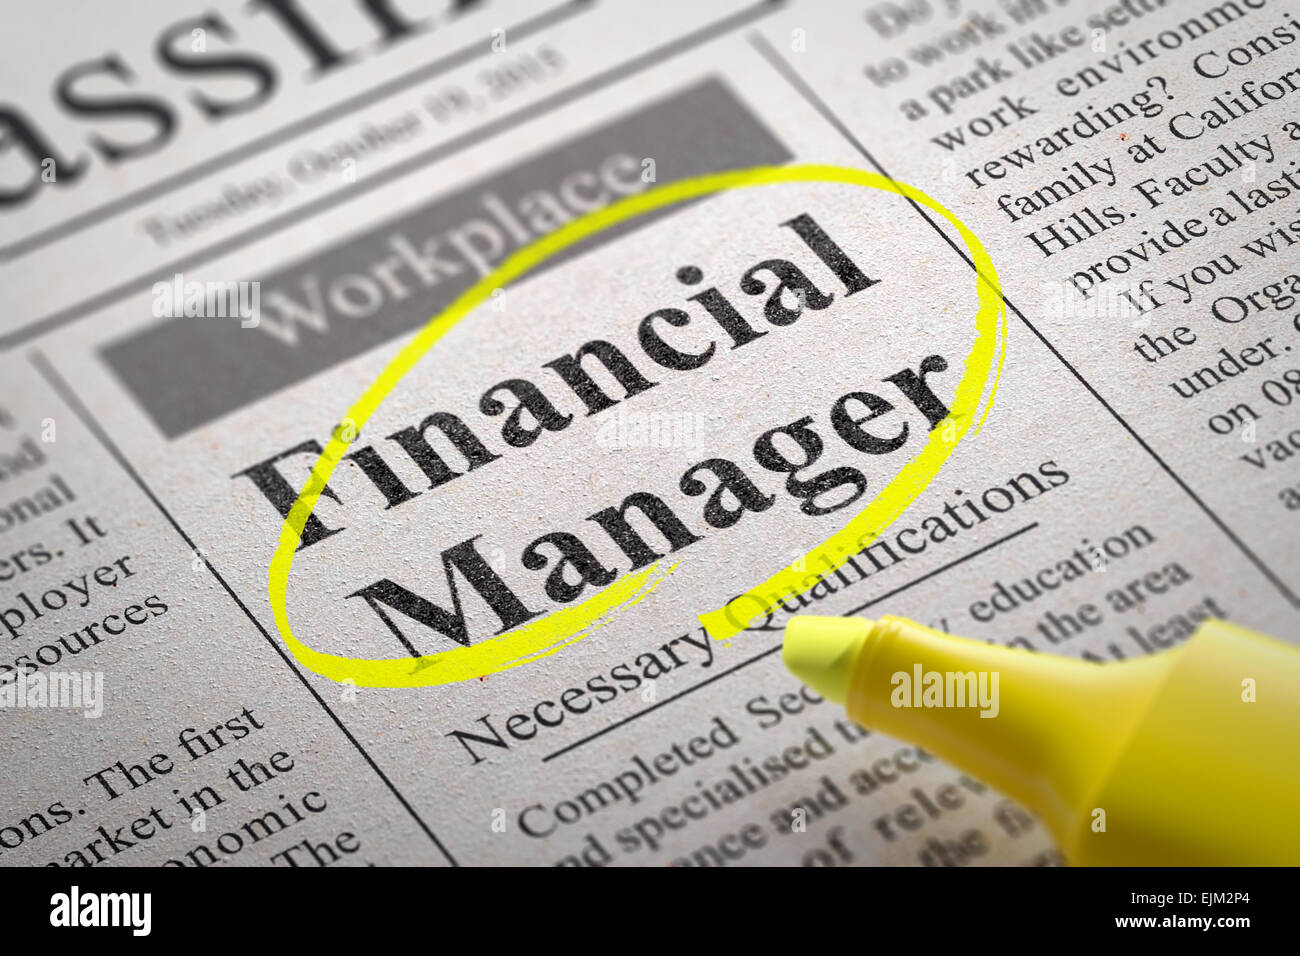 Financial Manager Jobs in Newspaper. Stock Photo